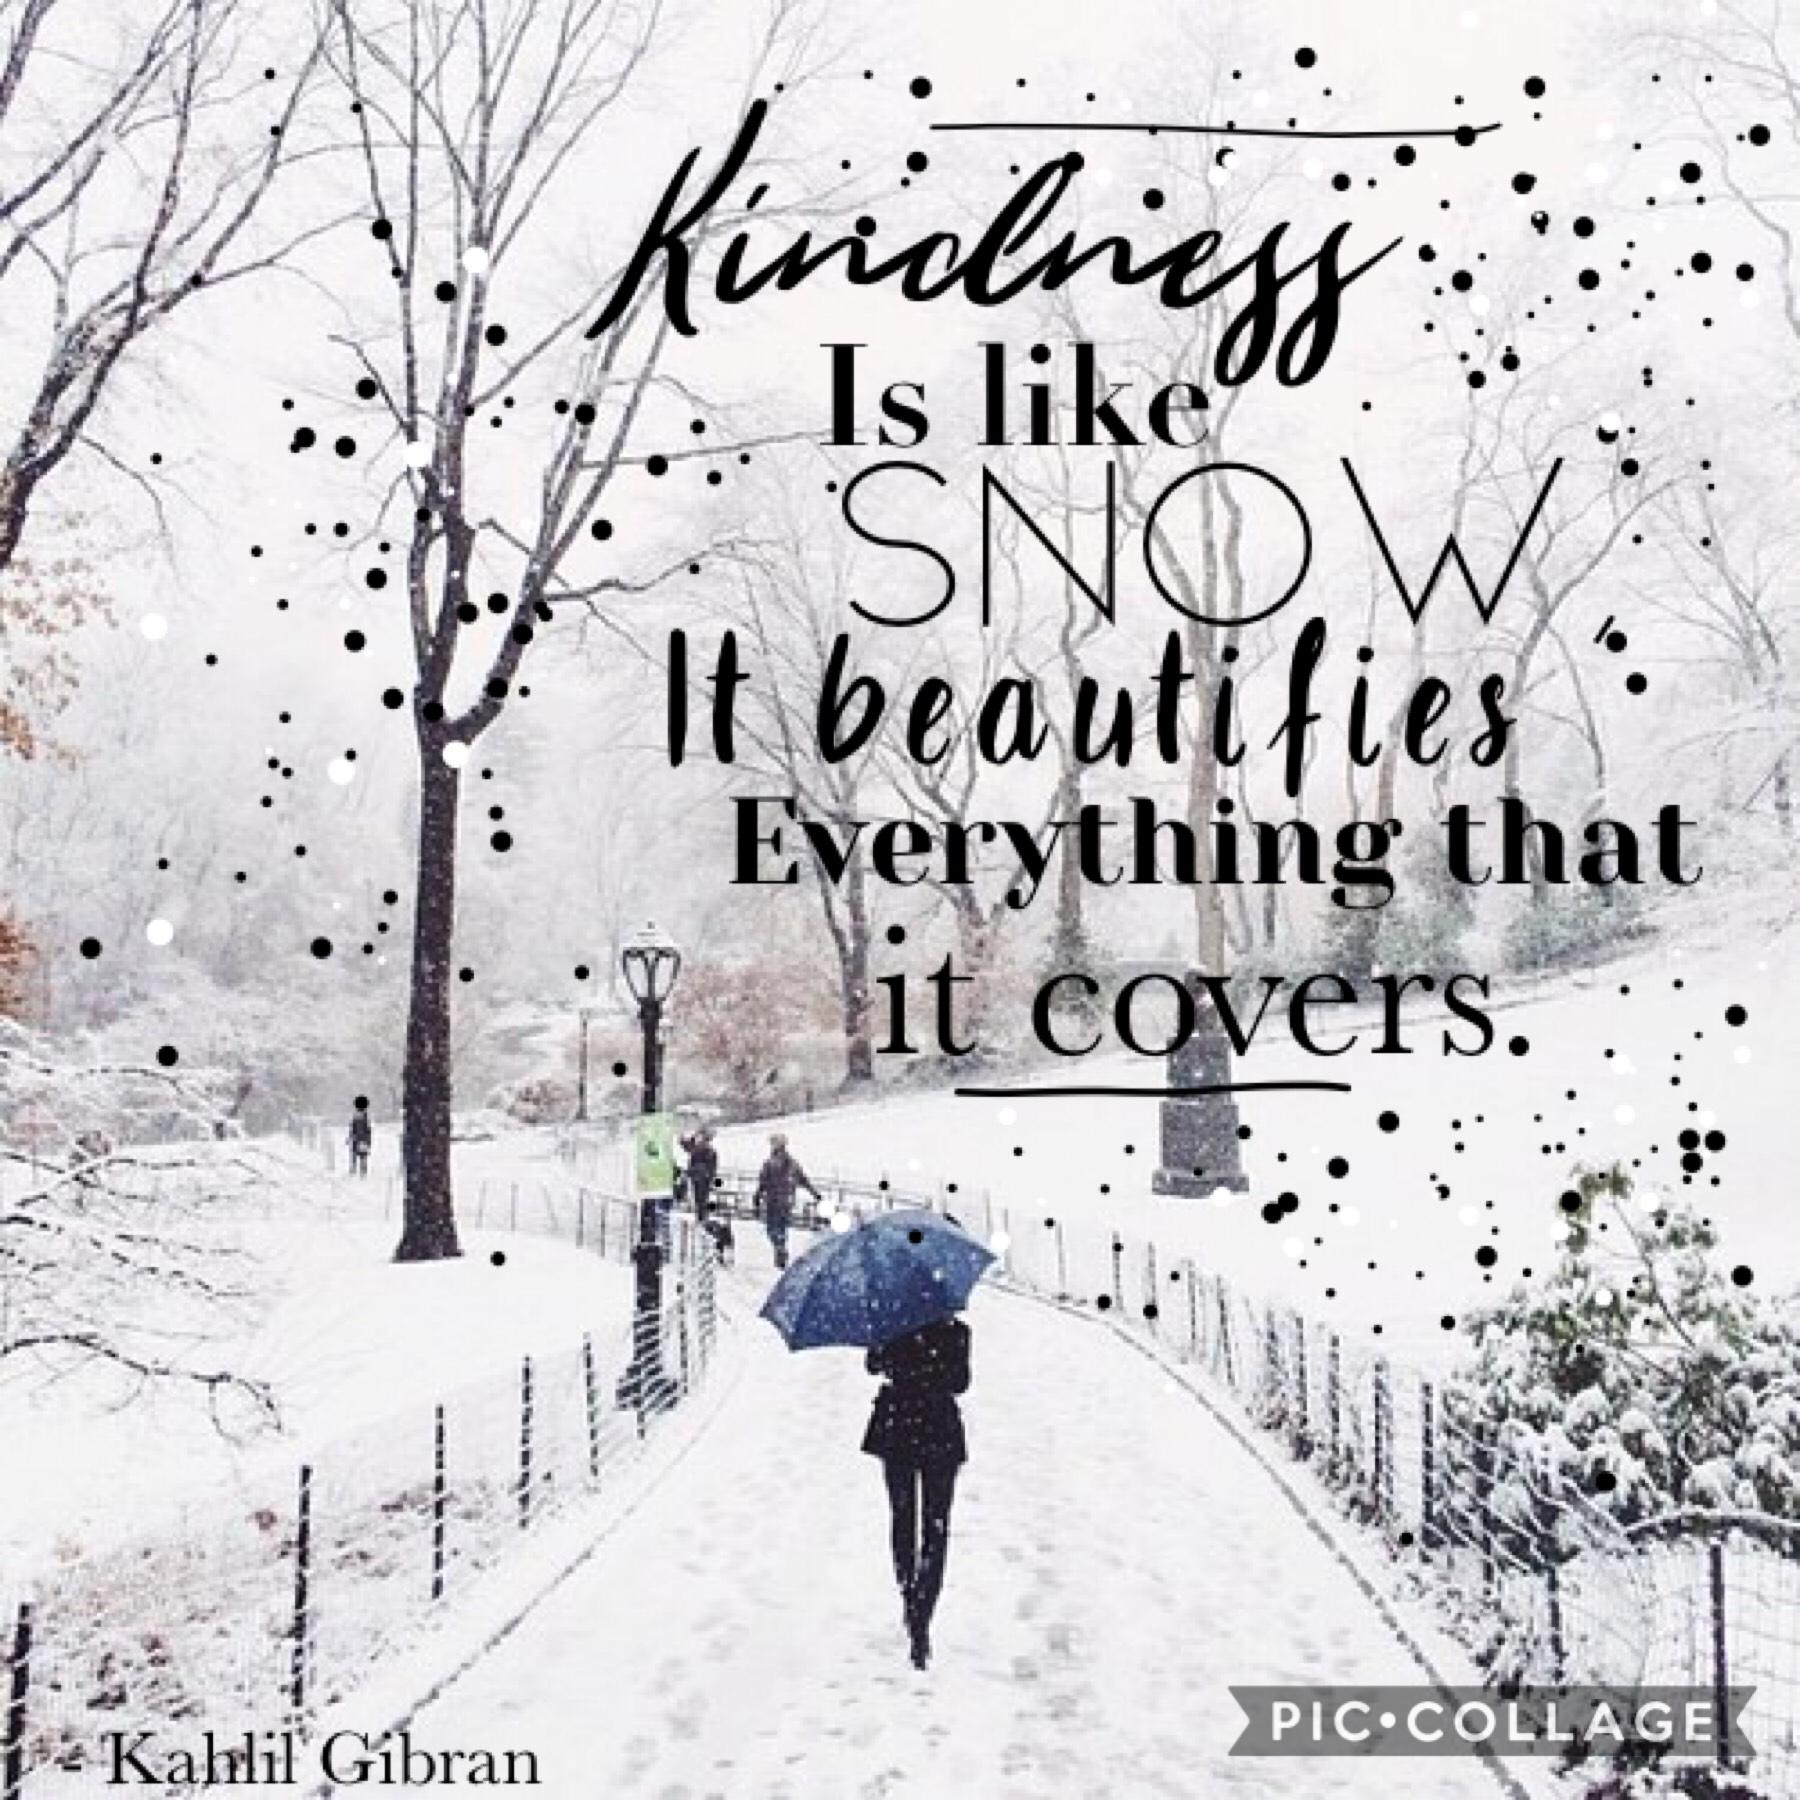 ❄️Kindness is like snow....❄️
Yay it’s winter!! 😆
Wow I haven’t posted in so long...😬 but hope you like this :)